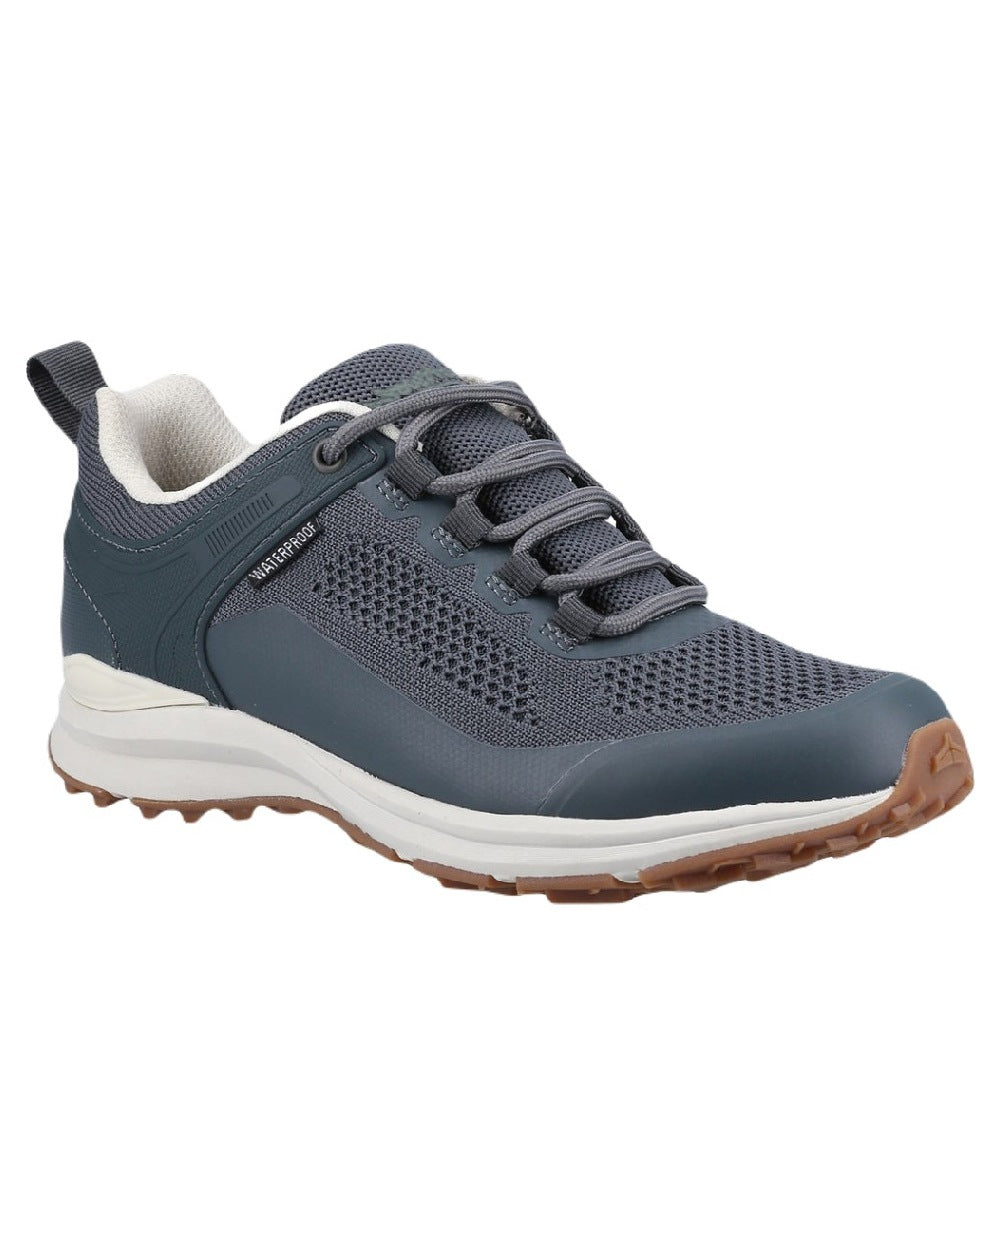 Grey coloured Cotswold Compton Womens Hiking Shoes on white background 